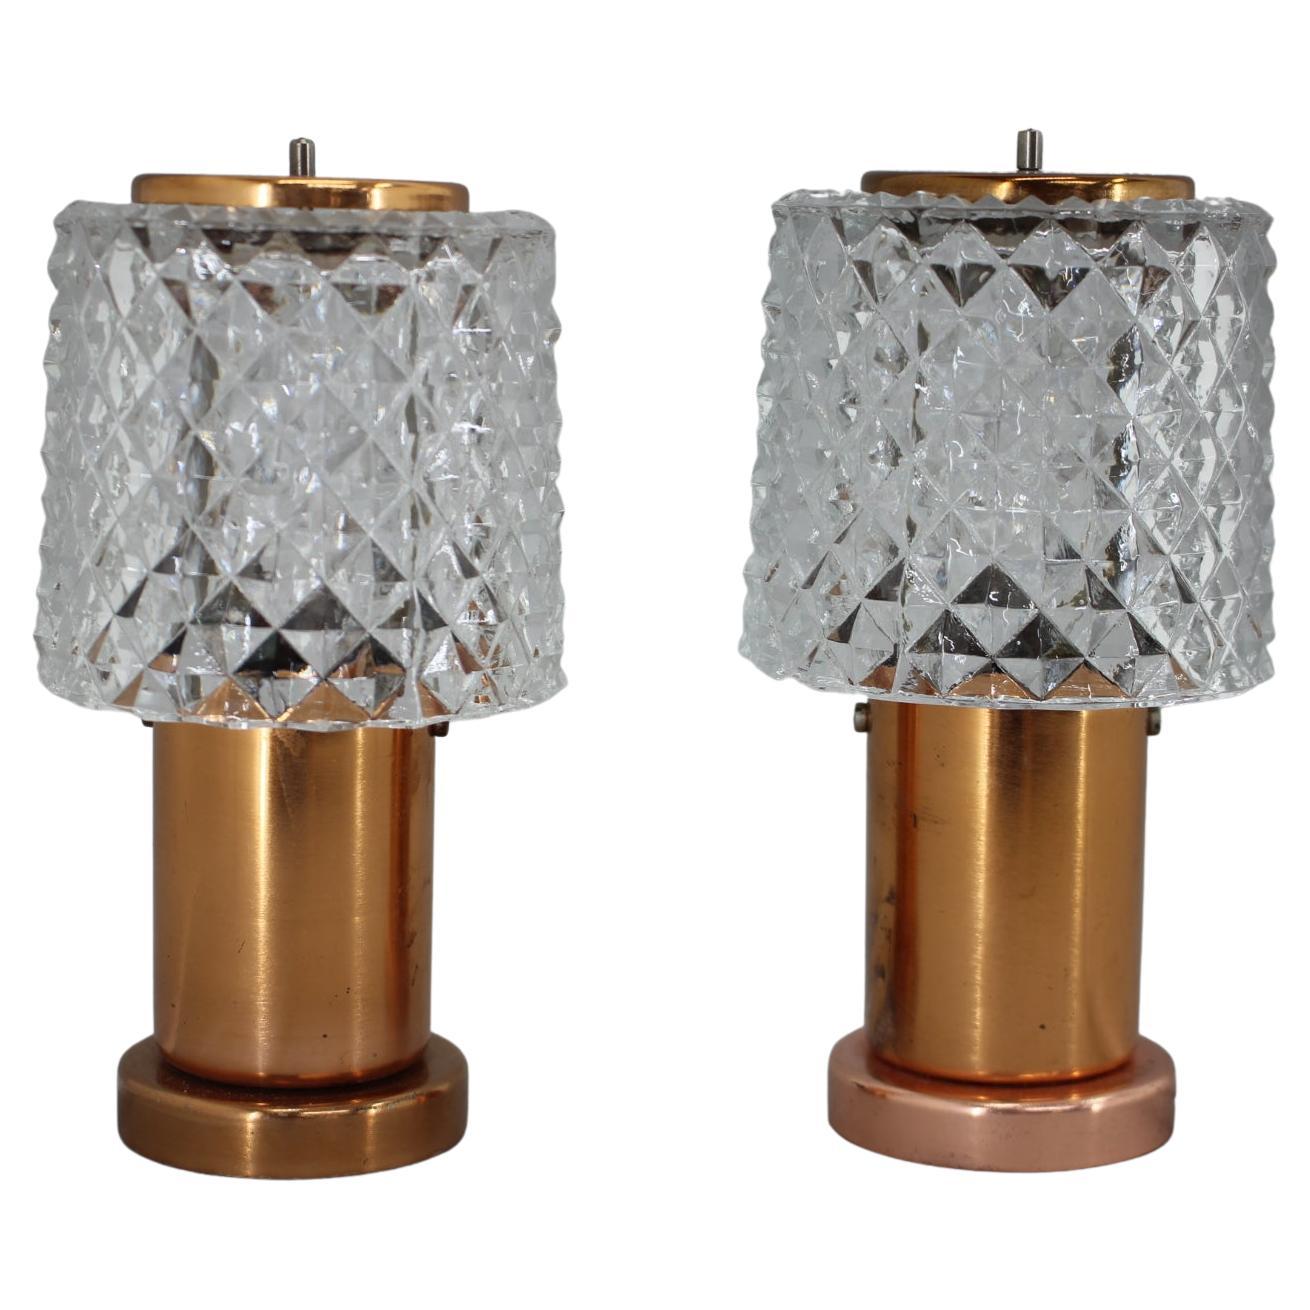 Pair of Table Lamps in Copper by Kamenicky Senov, Czechoslovakia